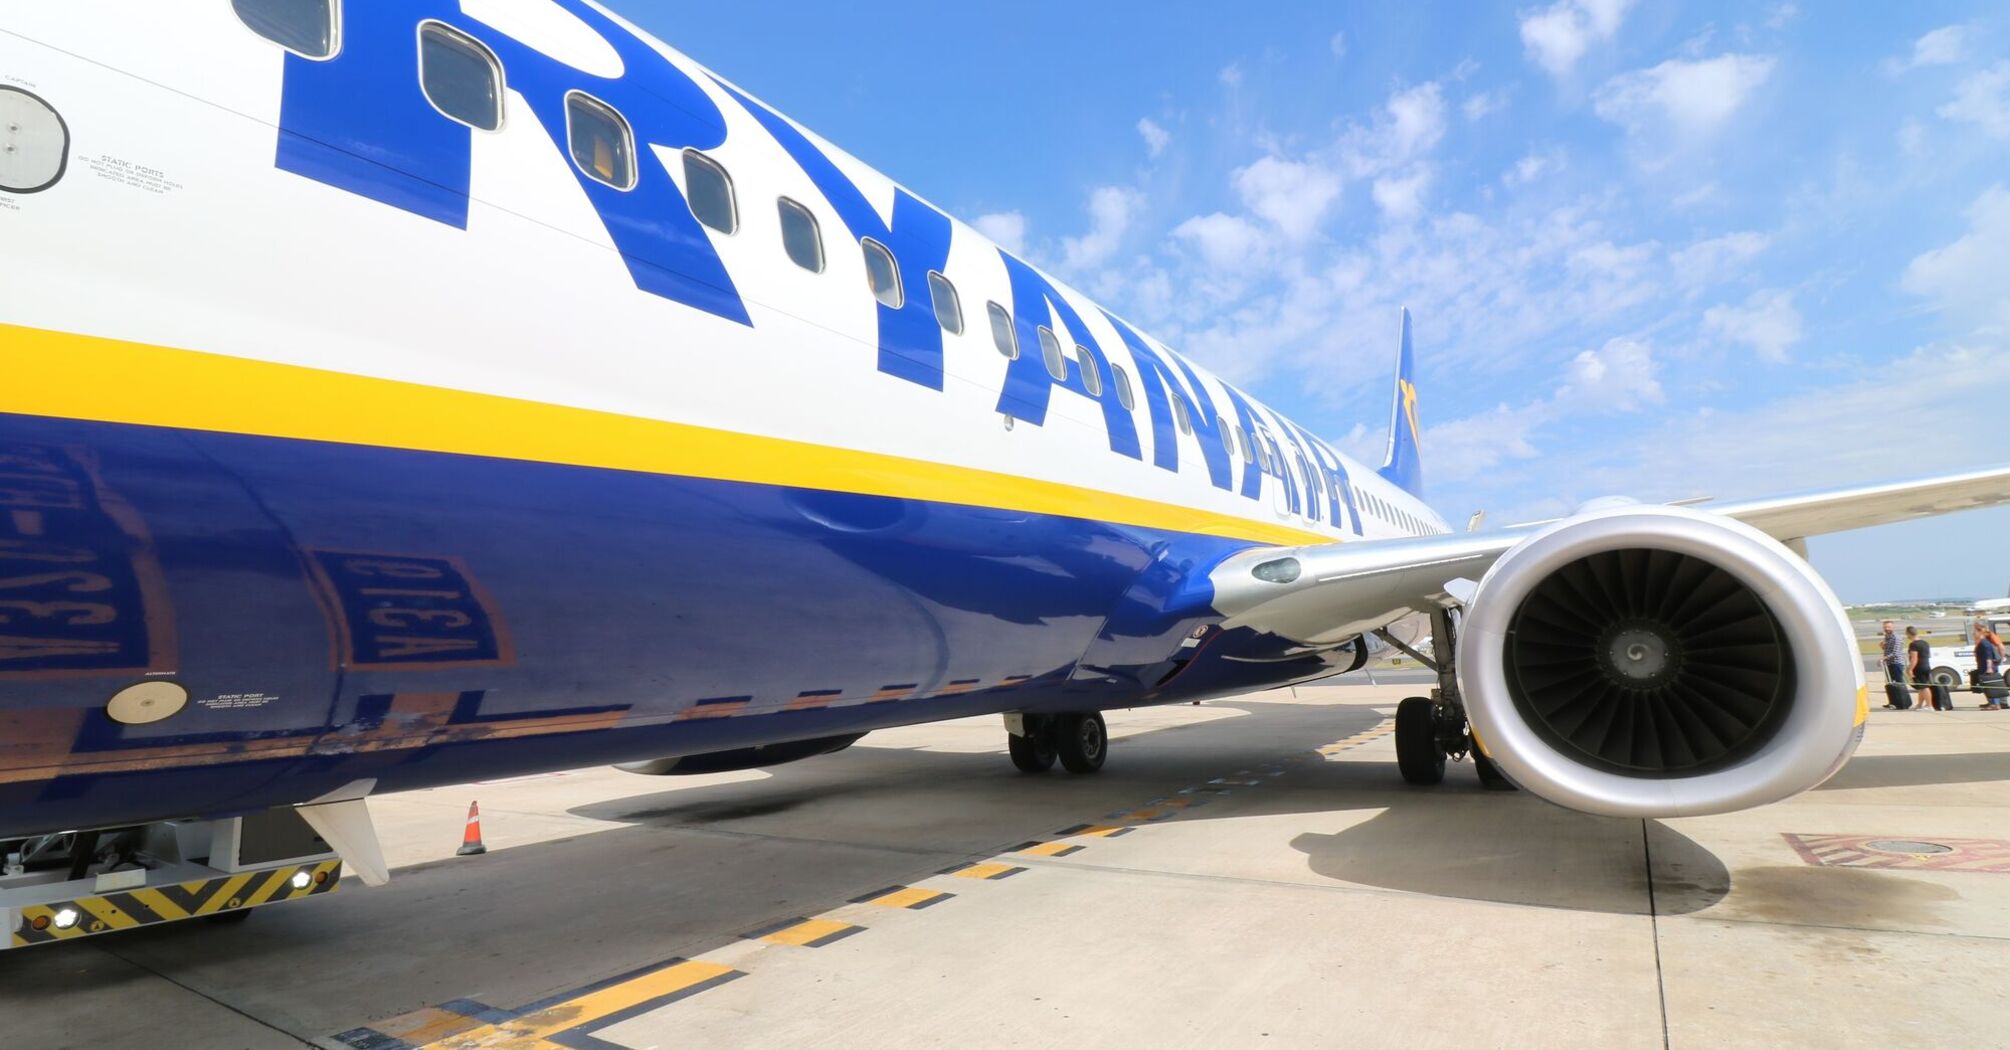 Ryanair aircraft on the tarmac with passengers boarding